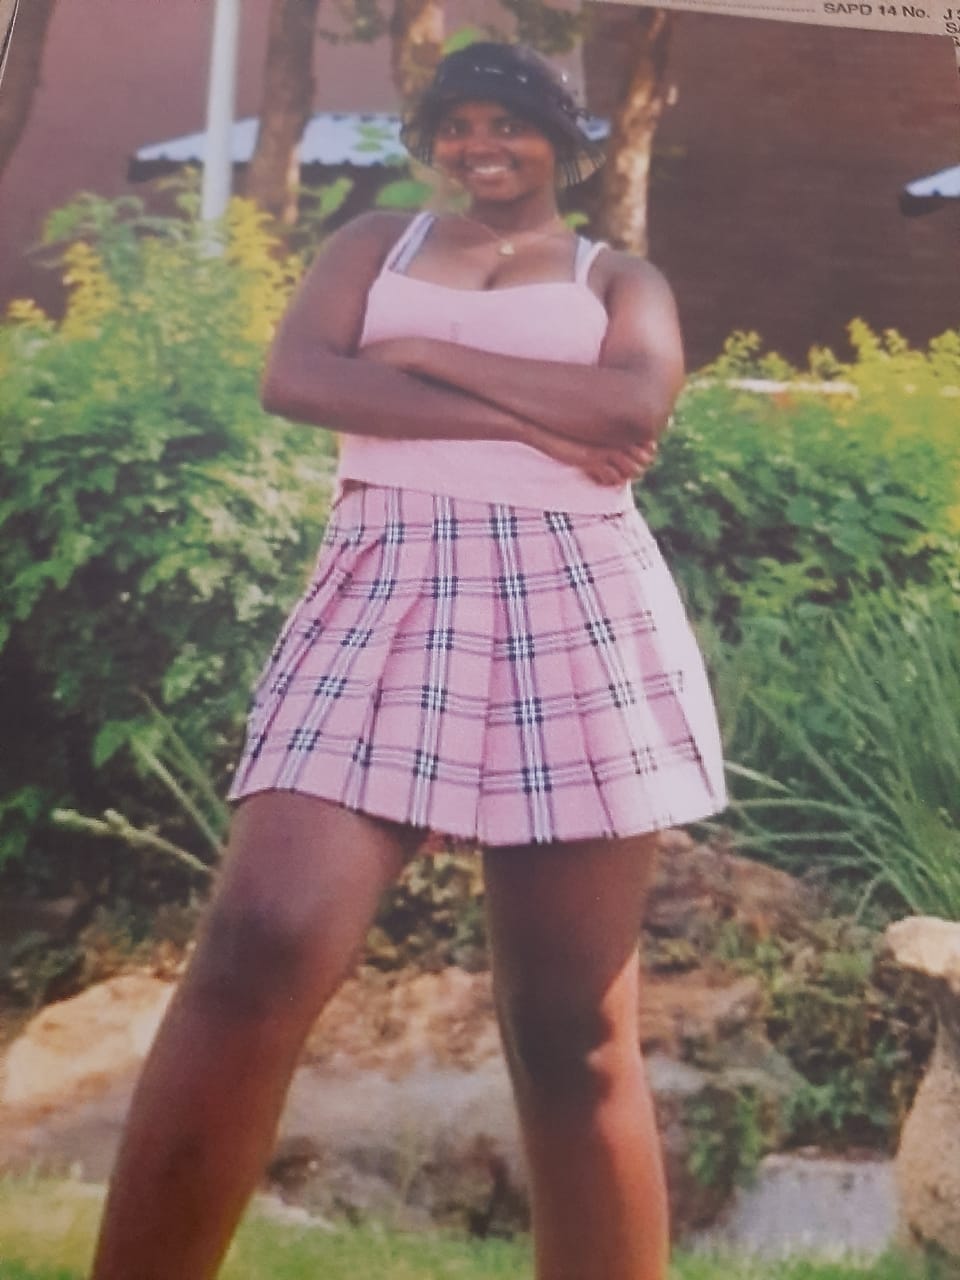 Community members are urged to help locate the missing girl